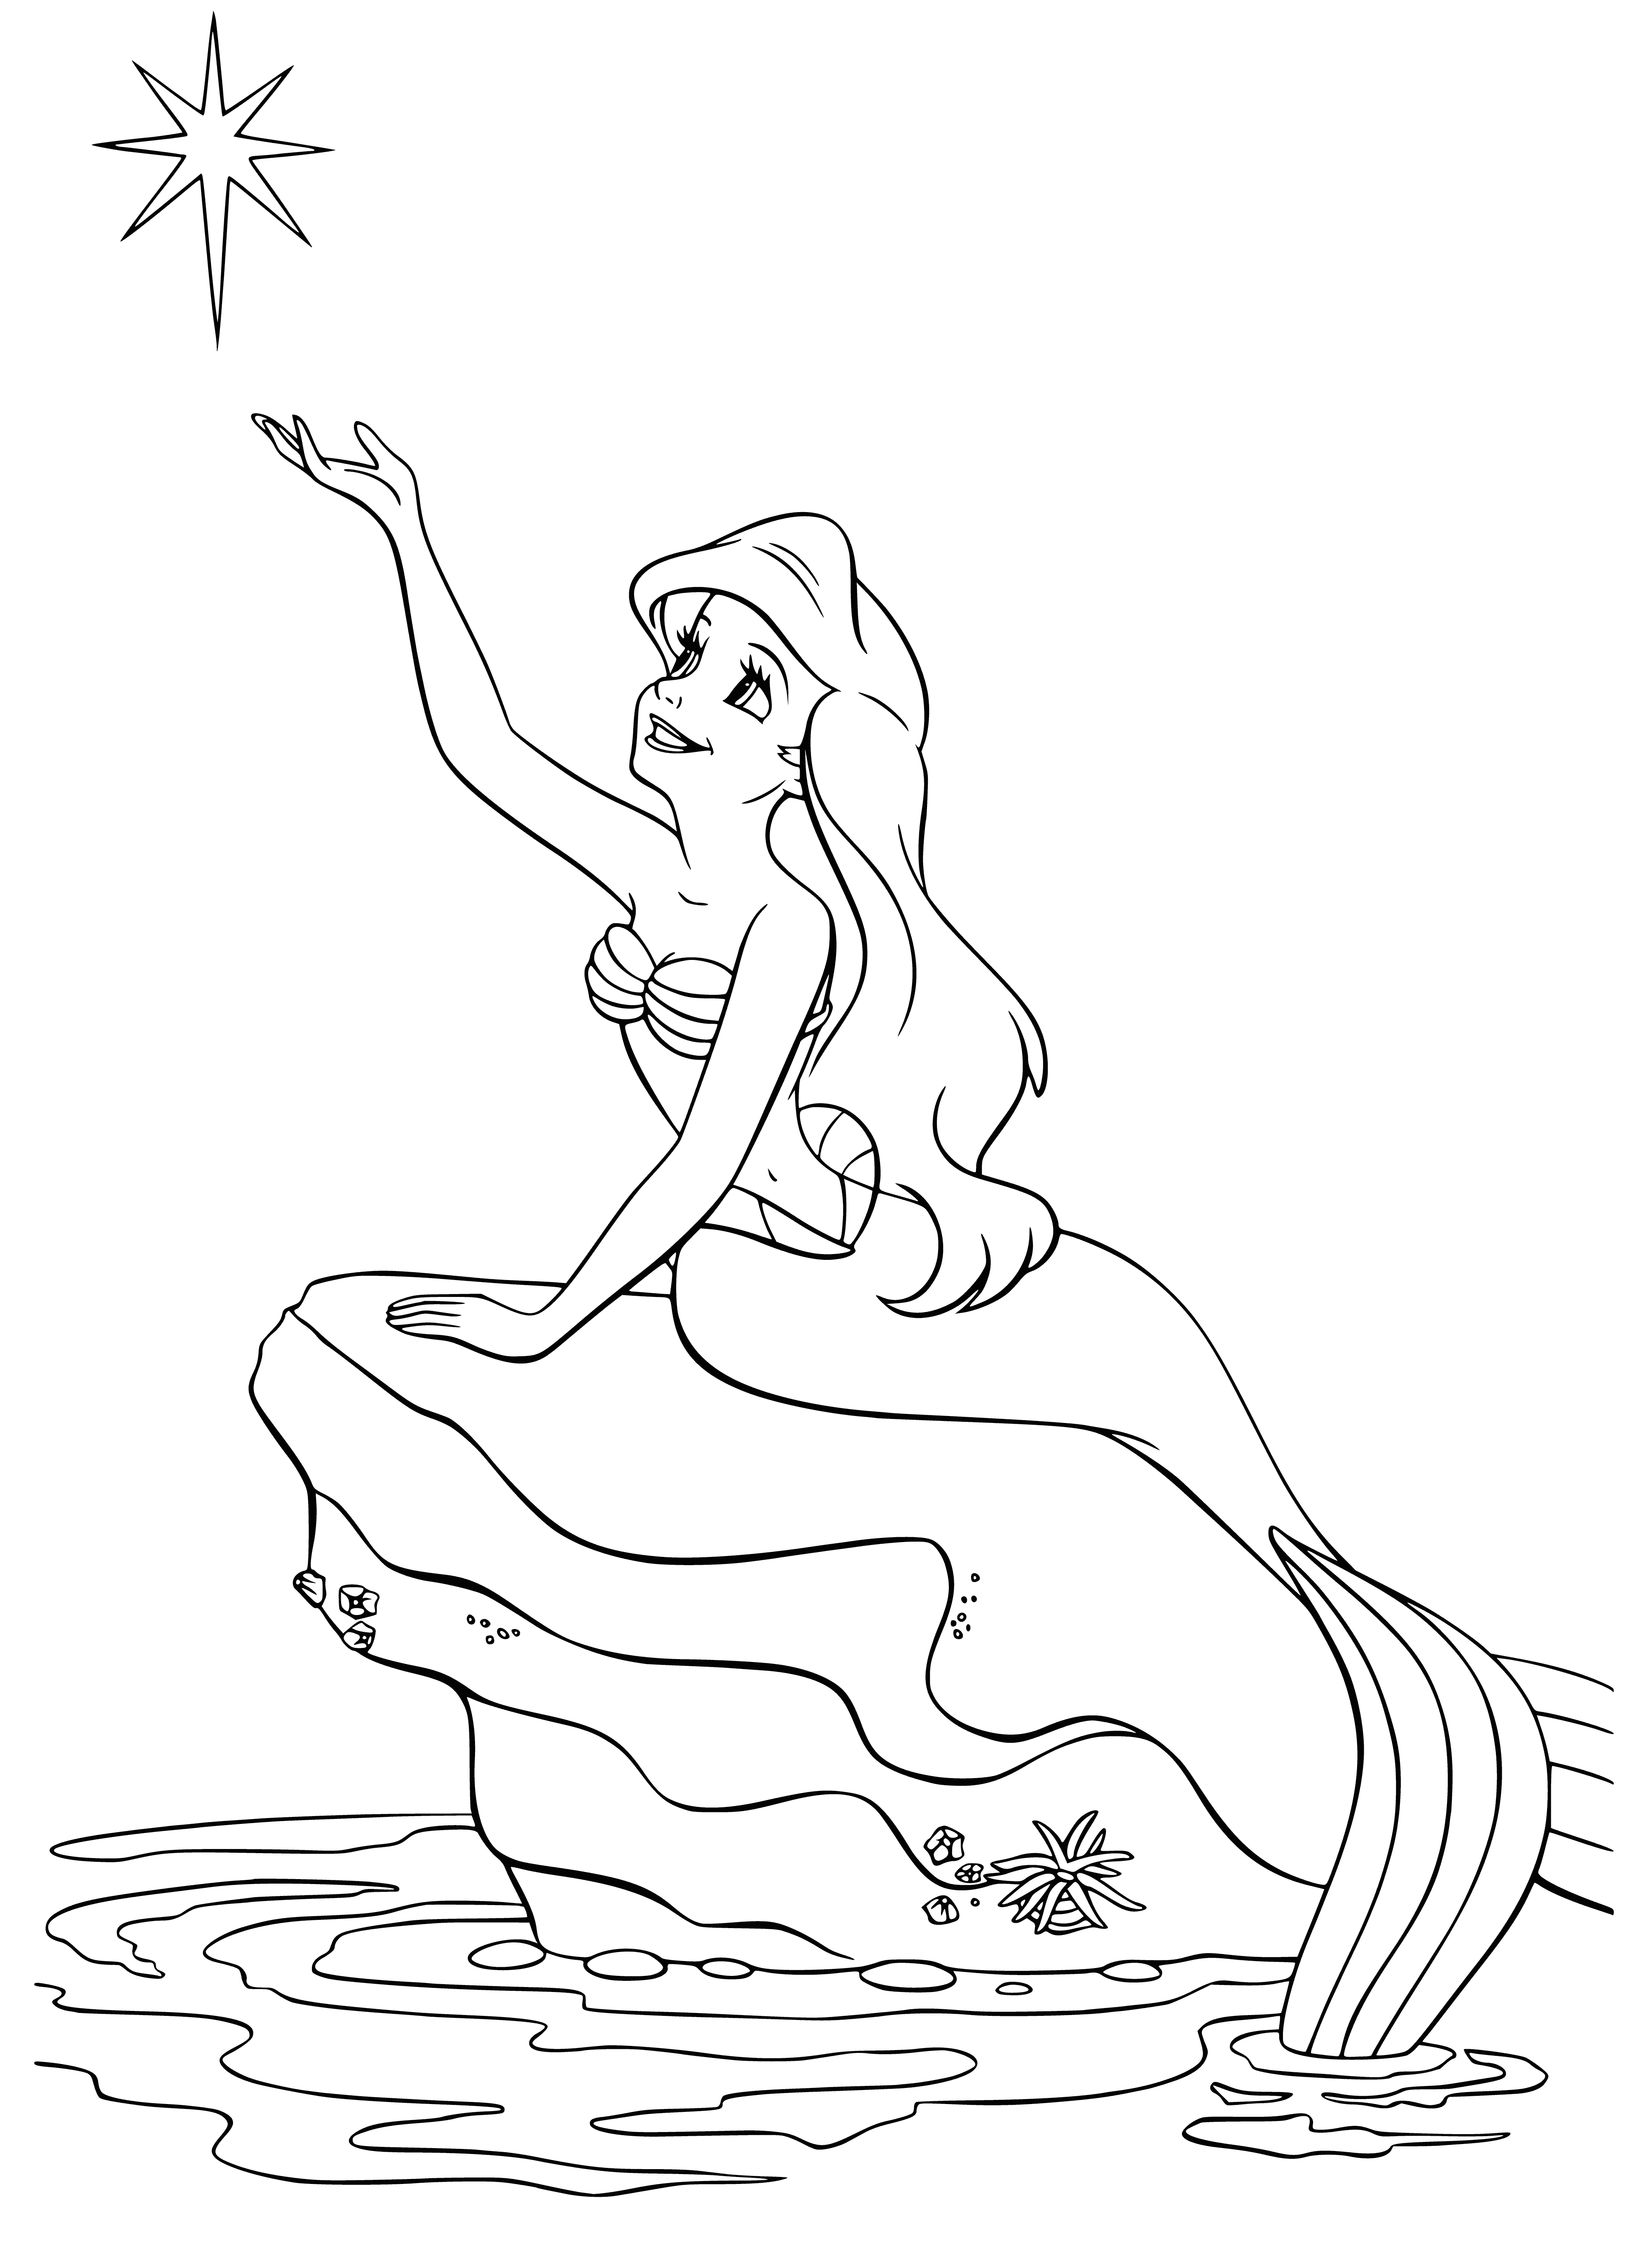 The little mermaid floated to the surface of the sea coloring page